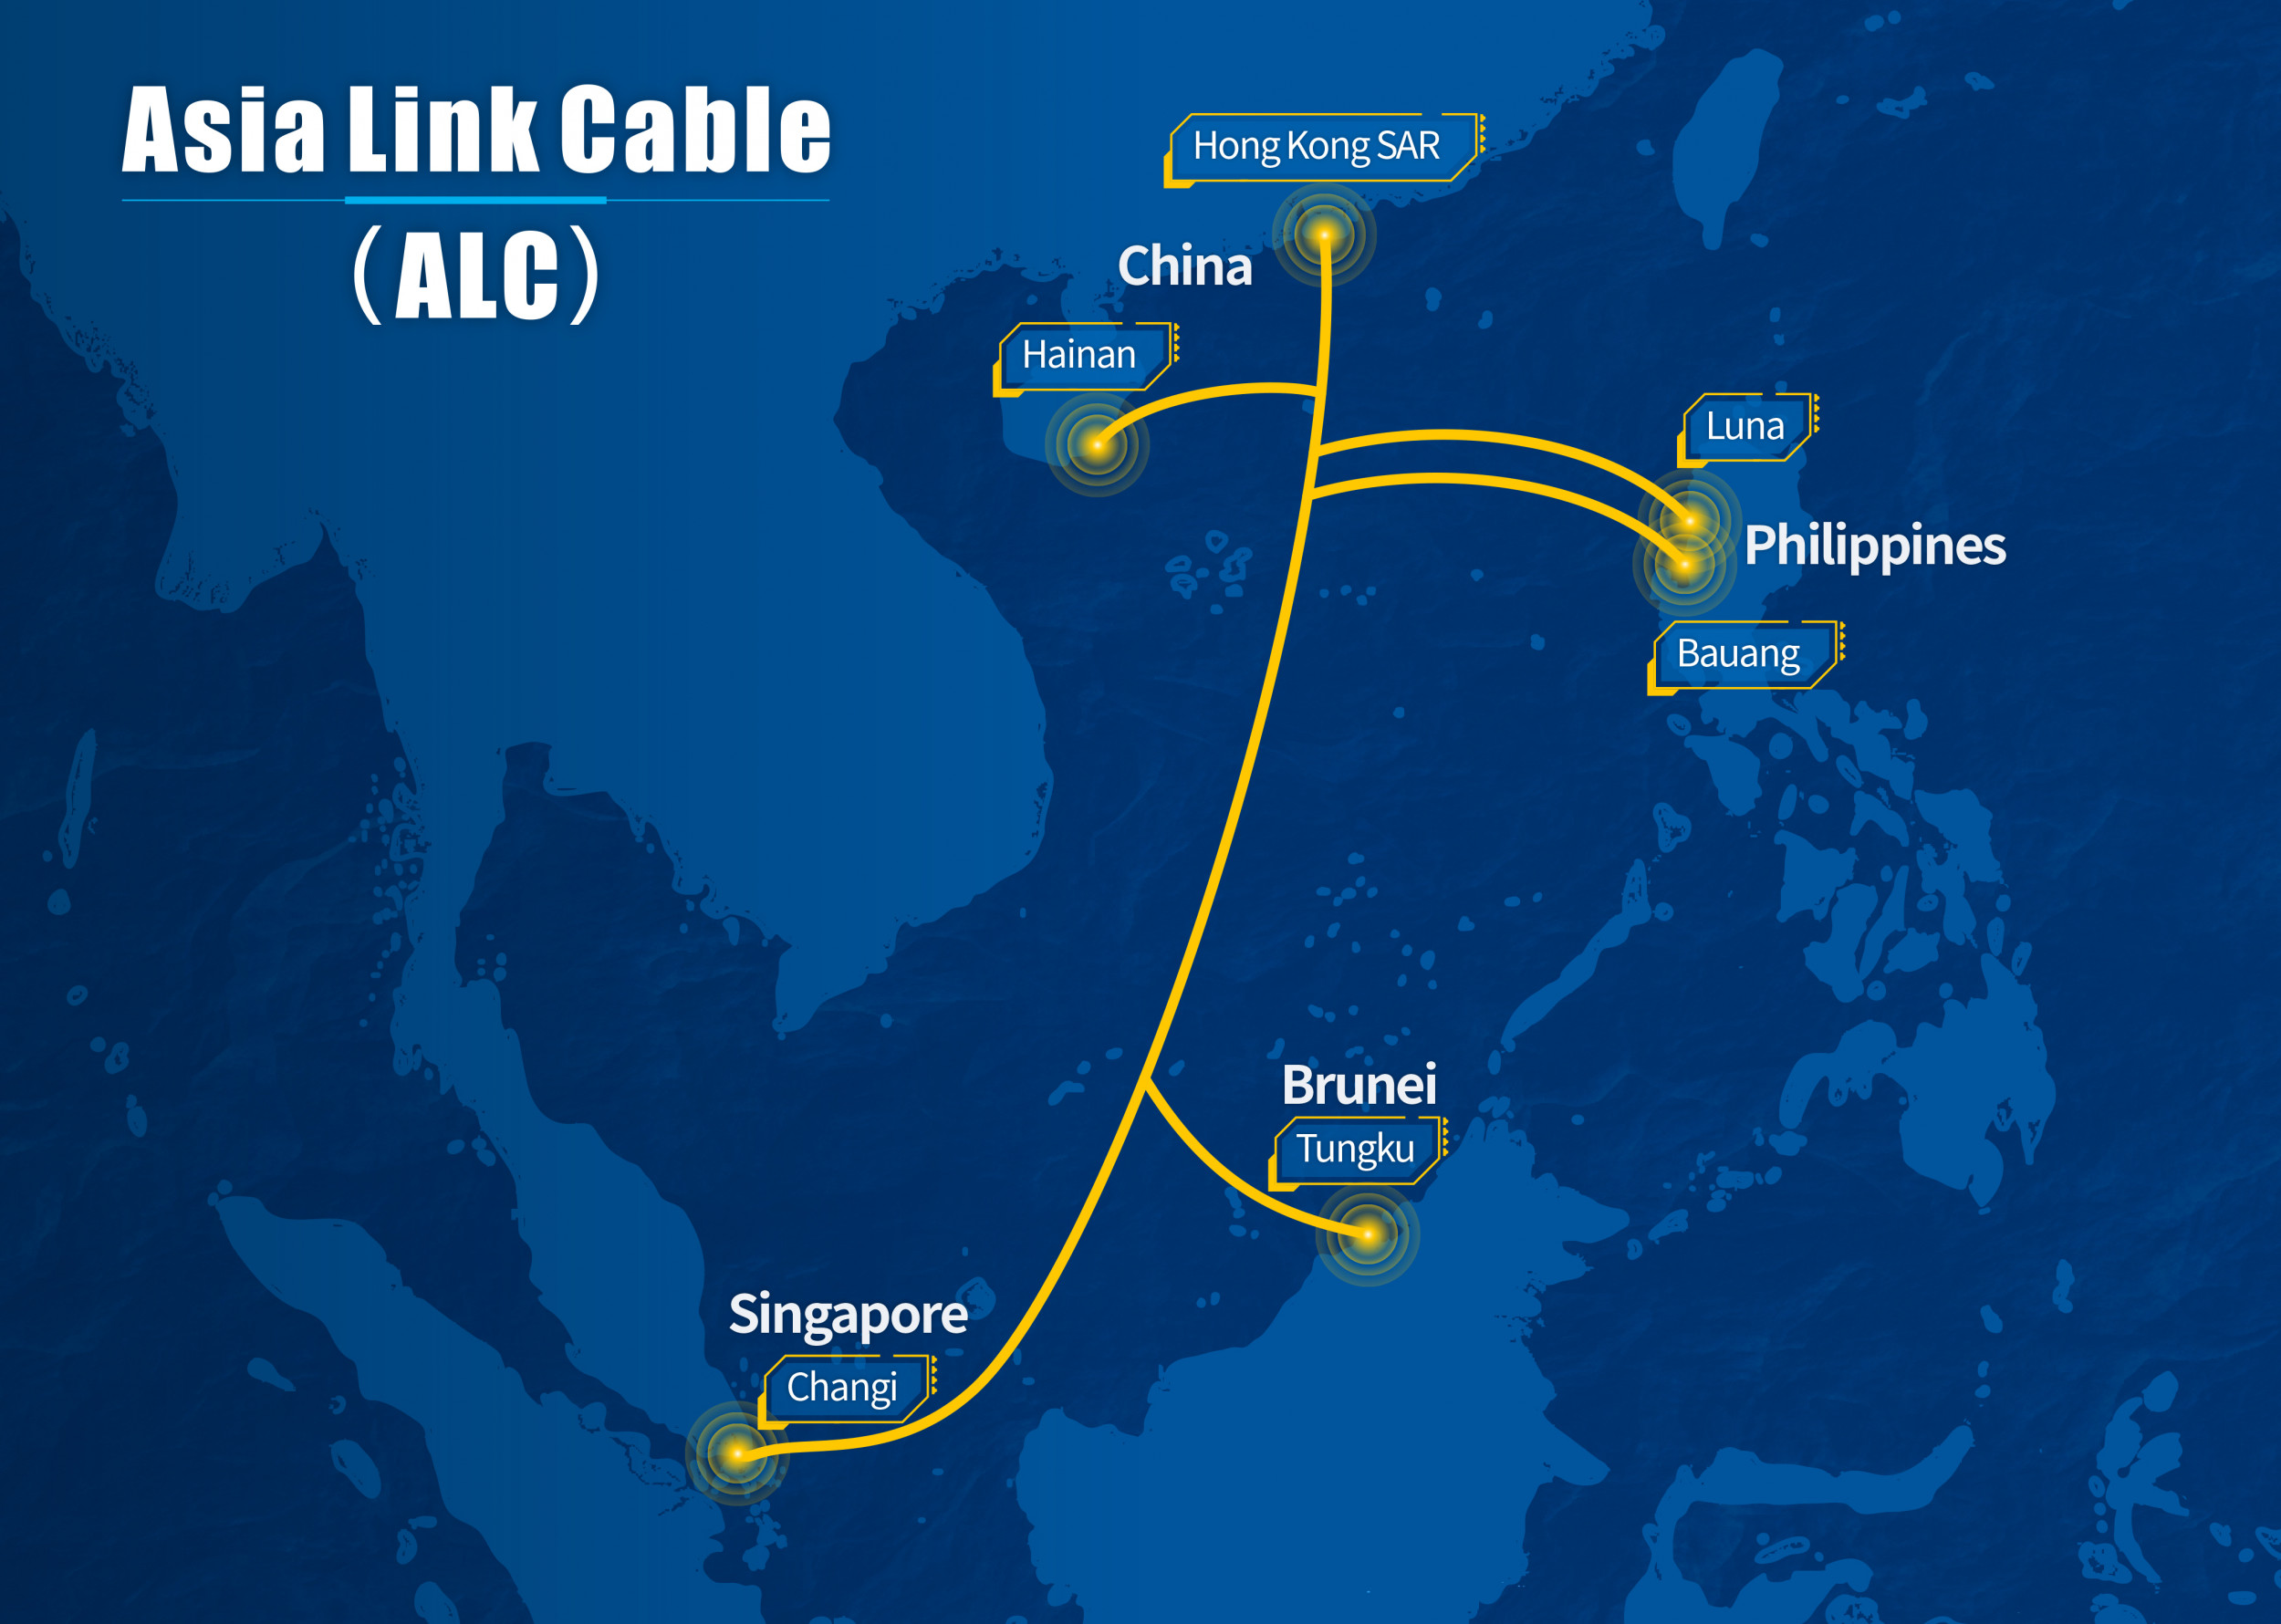 Asia Link Cable (ALC): New Subsea Cable System to Boost Trans-Asian Connectivity and Capacity